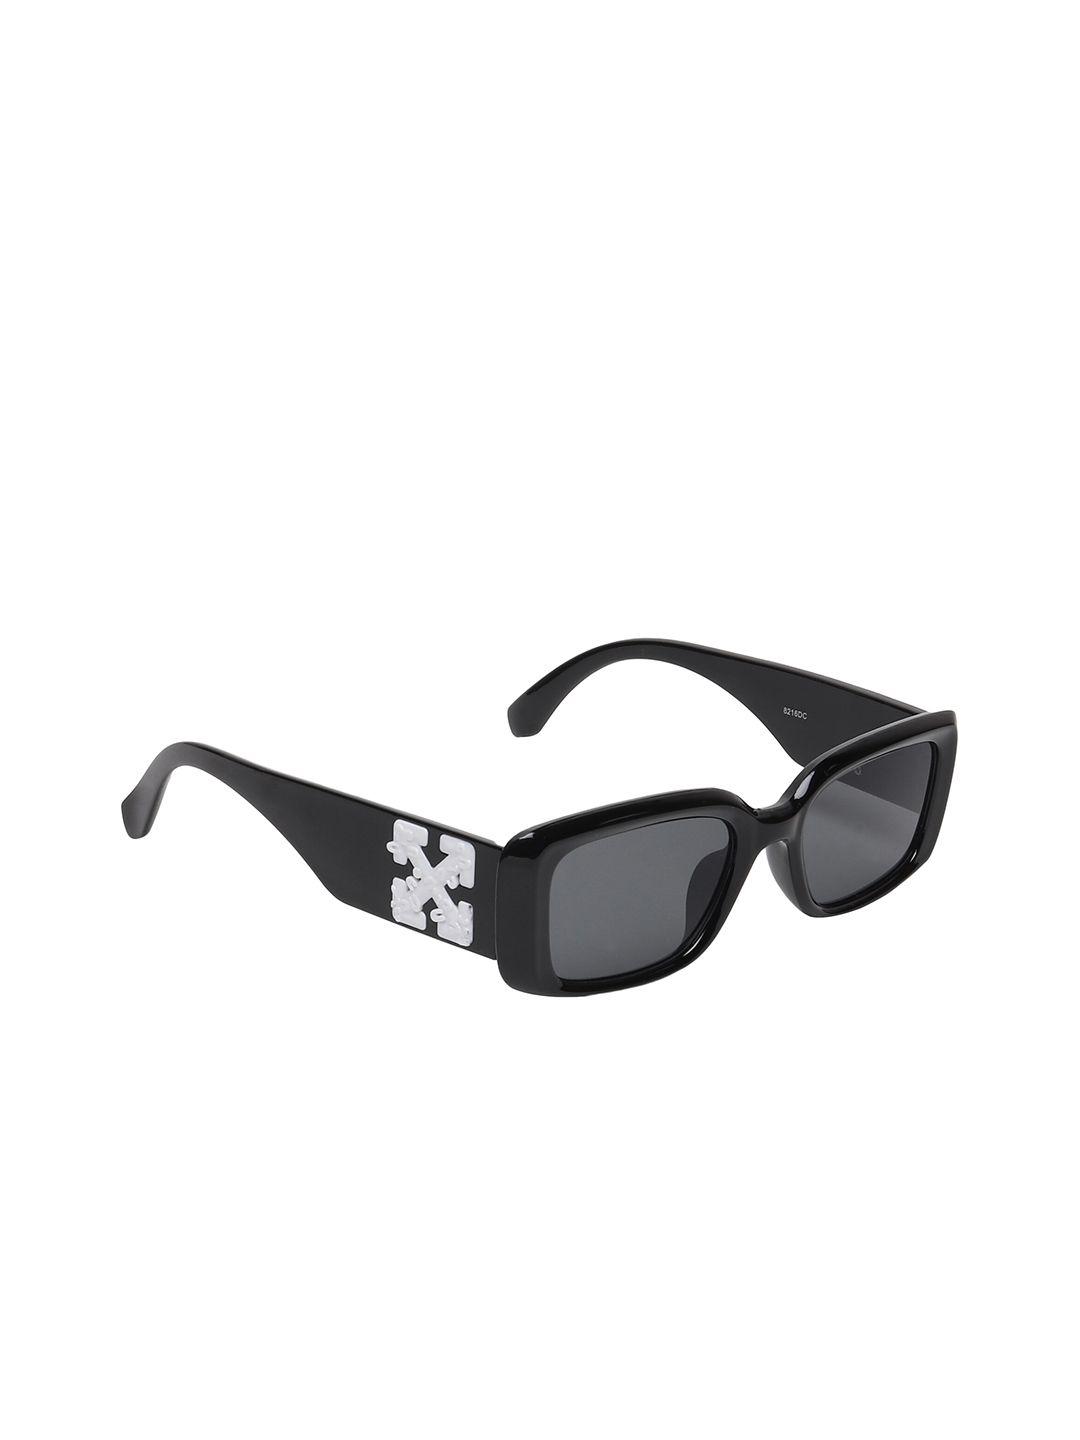 swiss design unisex grey lens & black other sunglasses with uv protected lens